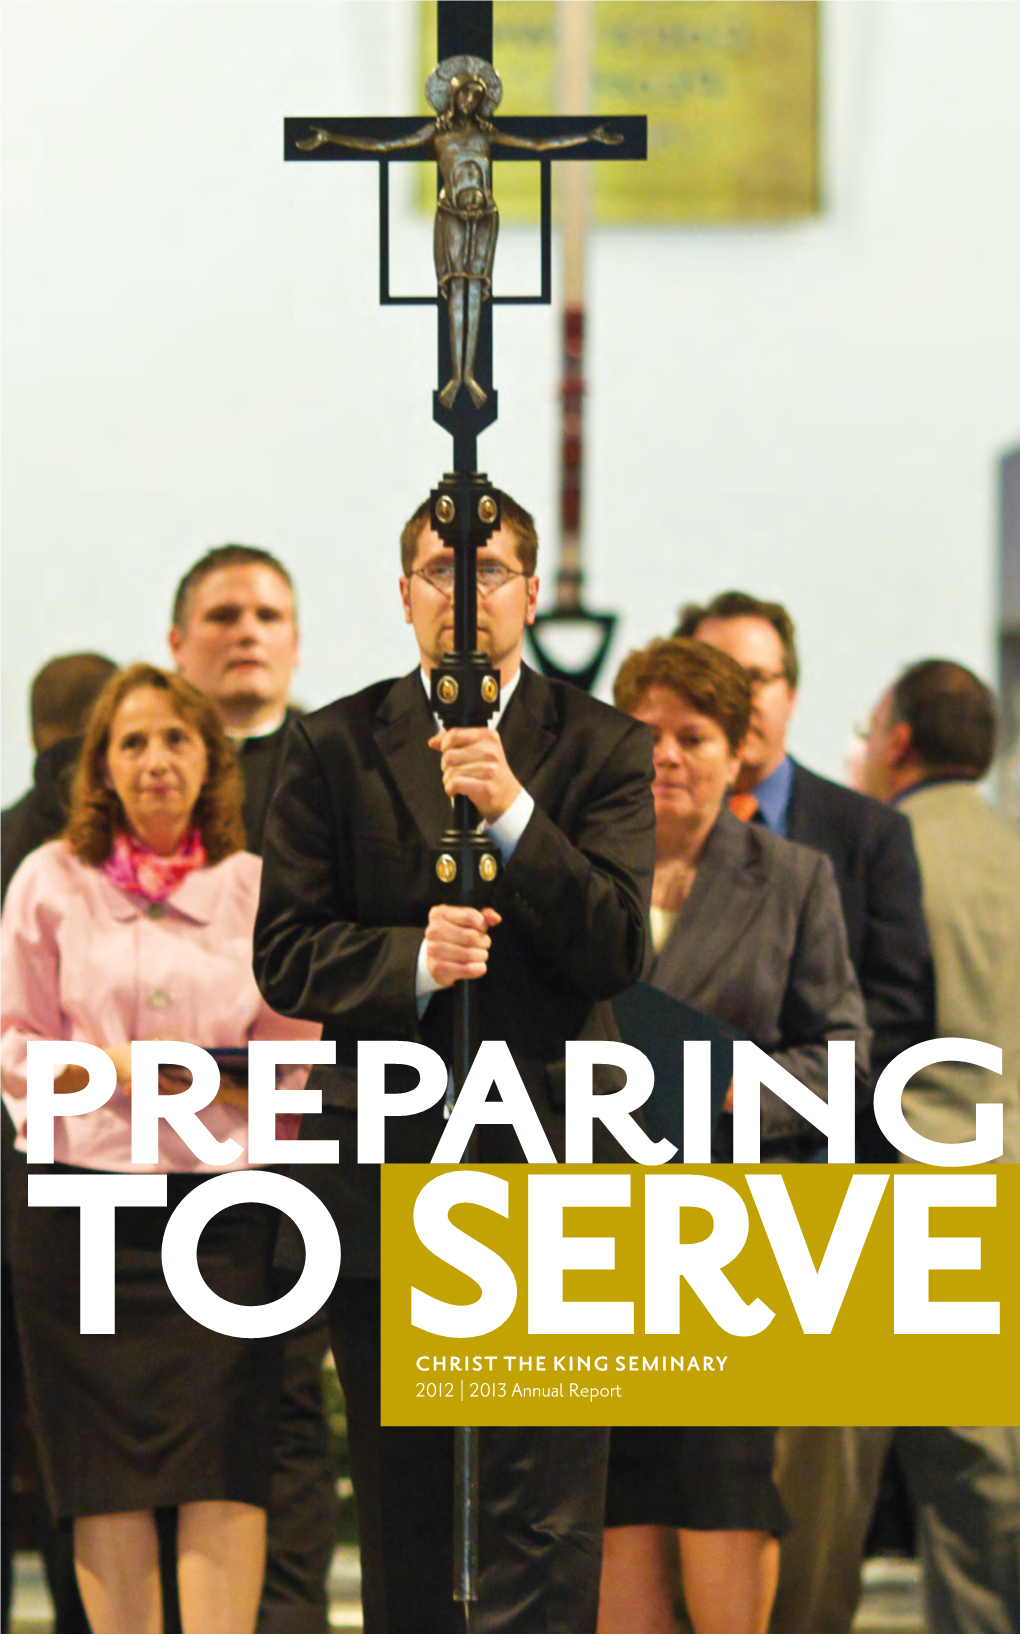 To Serve, and That We Disciples of Jesus Are Called to Do the Same